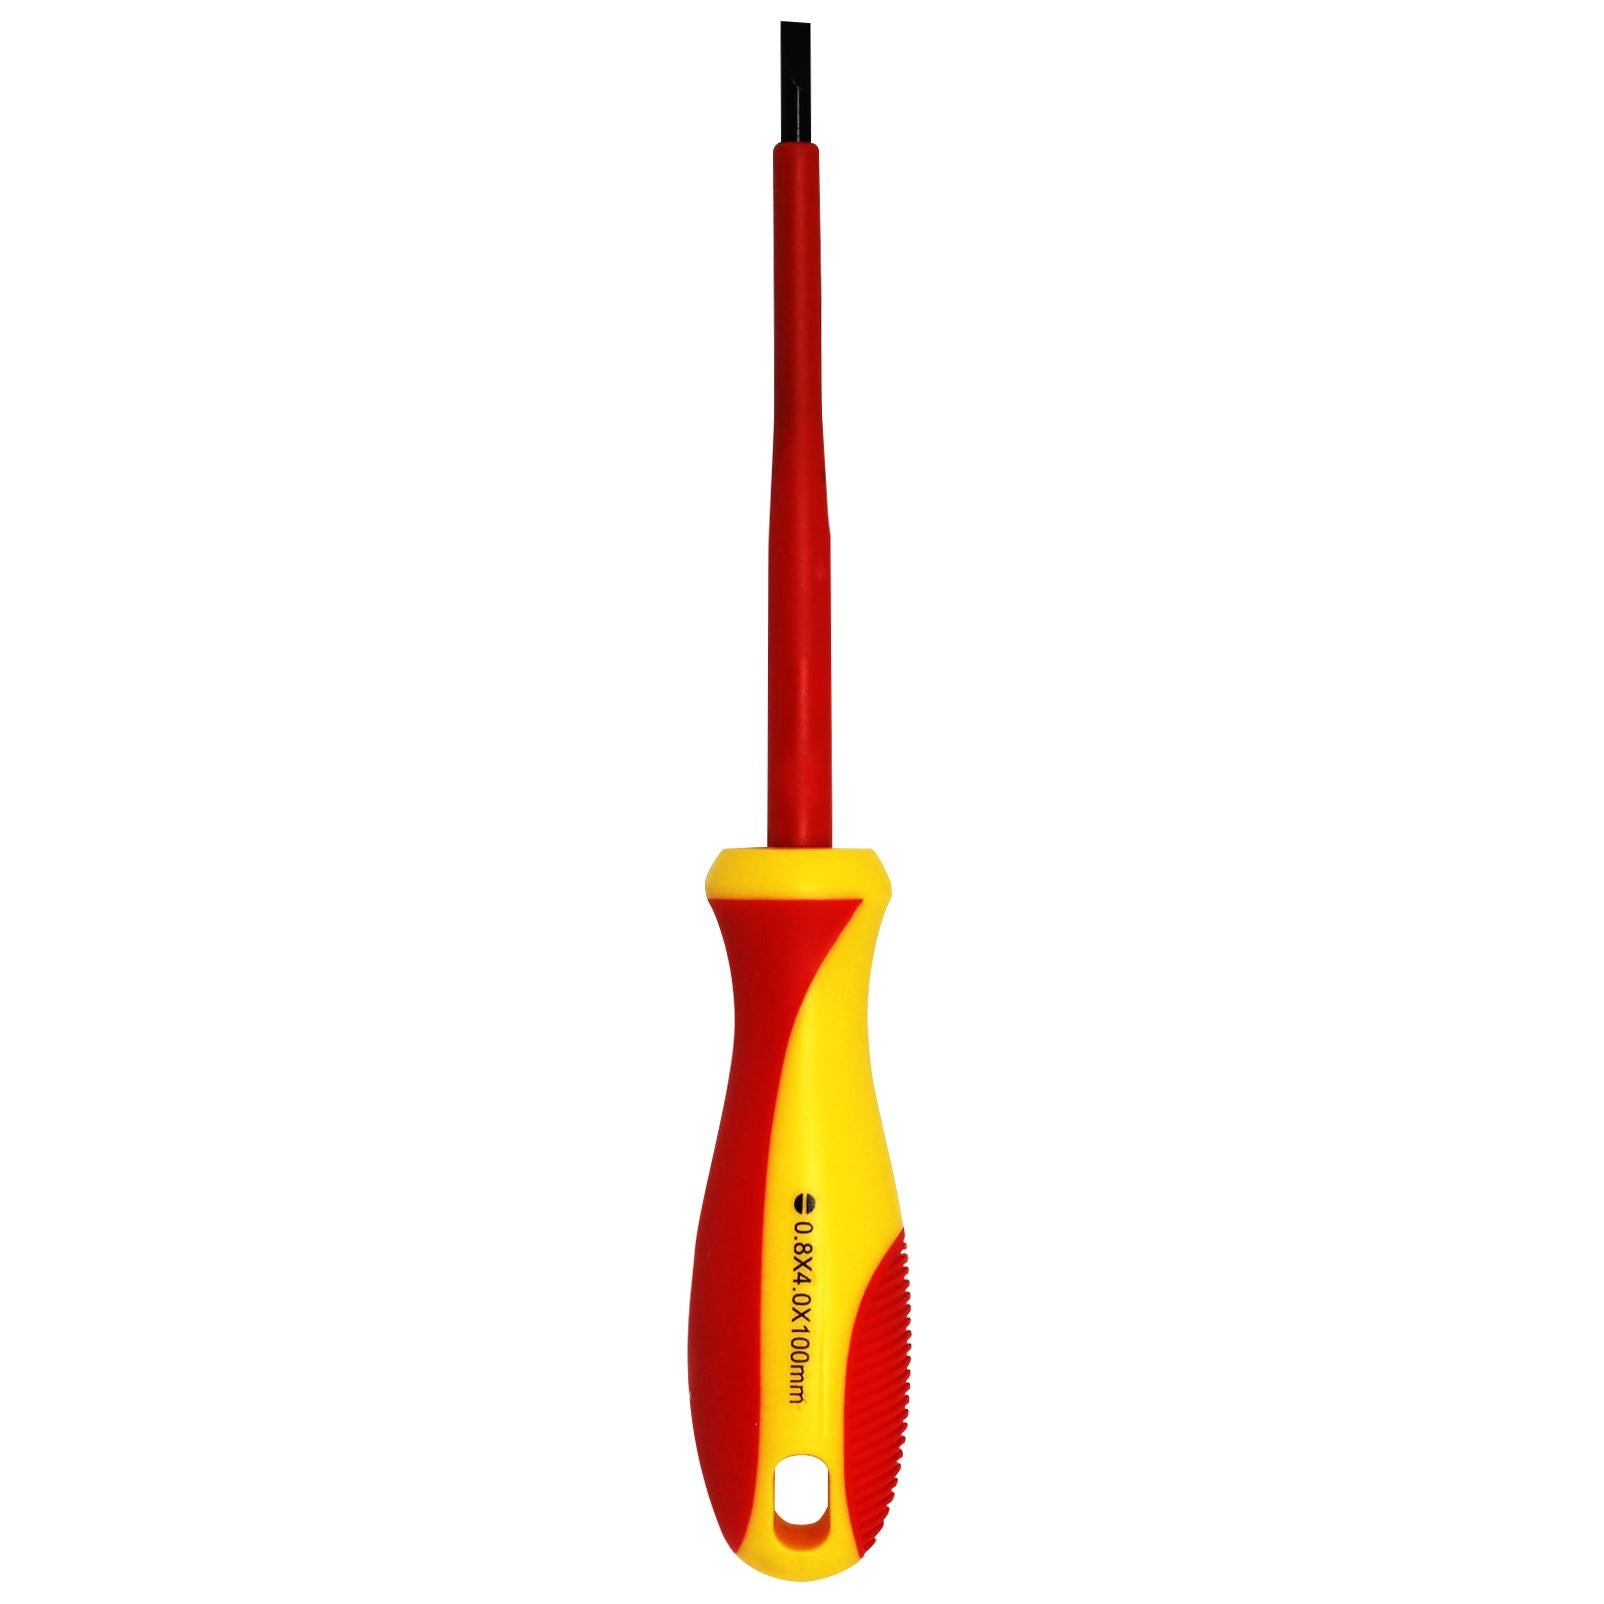 GOLDTOOL_100mm_Electrical_Insulated_VDE_Screwdriver._Tested_to_1000_Volts_AC._(0.8*4*100mm)._Yellow/Red_Colour_Handle